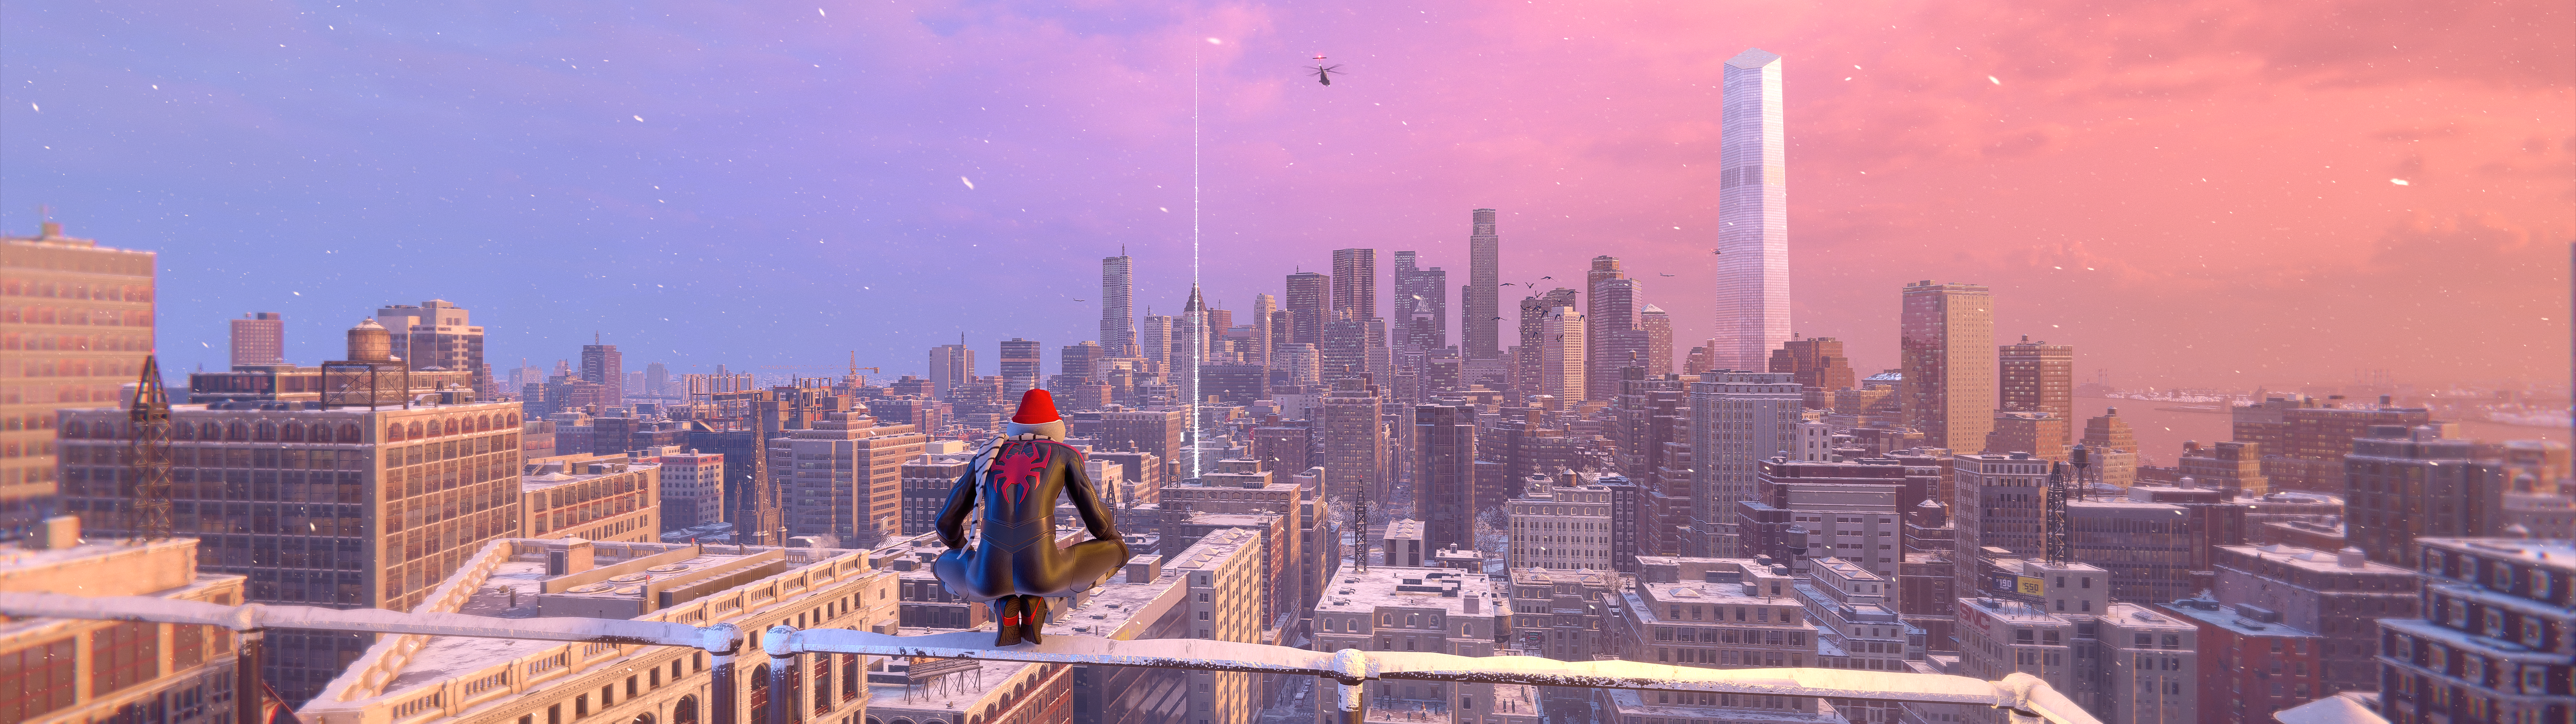 General 5120x1440 Spider-Man Miles Morales ultrawide video game characters New York City winter building cityscape helicopters sunset sunset glow city sky digital art